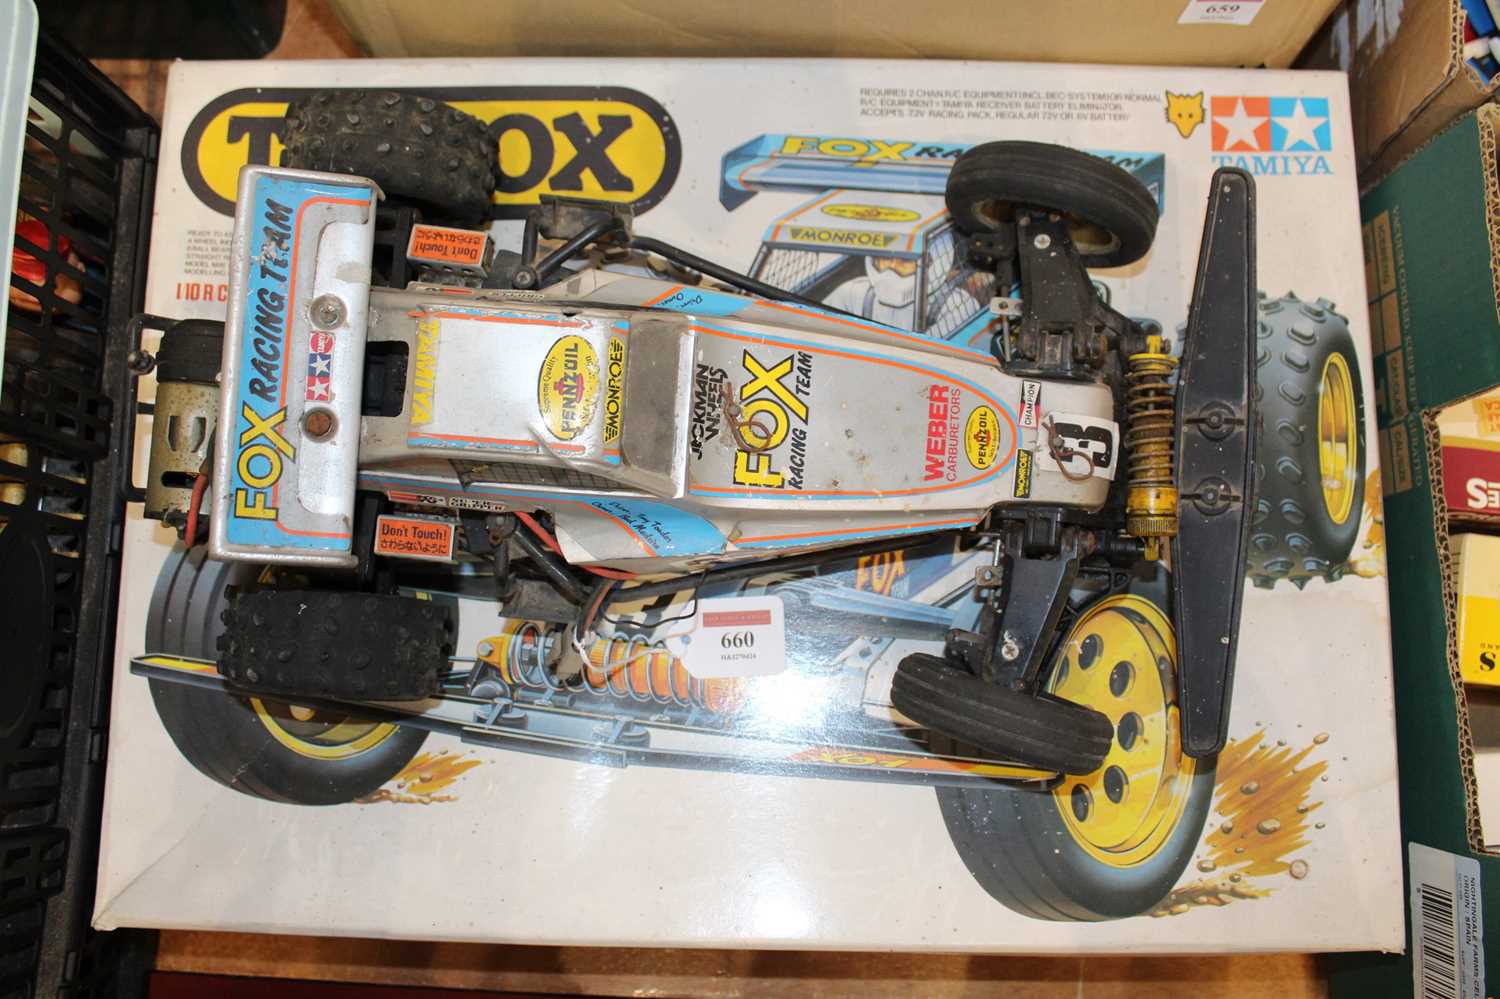 Tamiya 'The Fox' 1/10 radio controlled off road high performance racer (untested) (worn) (could